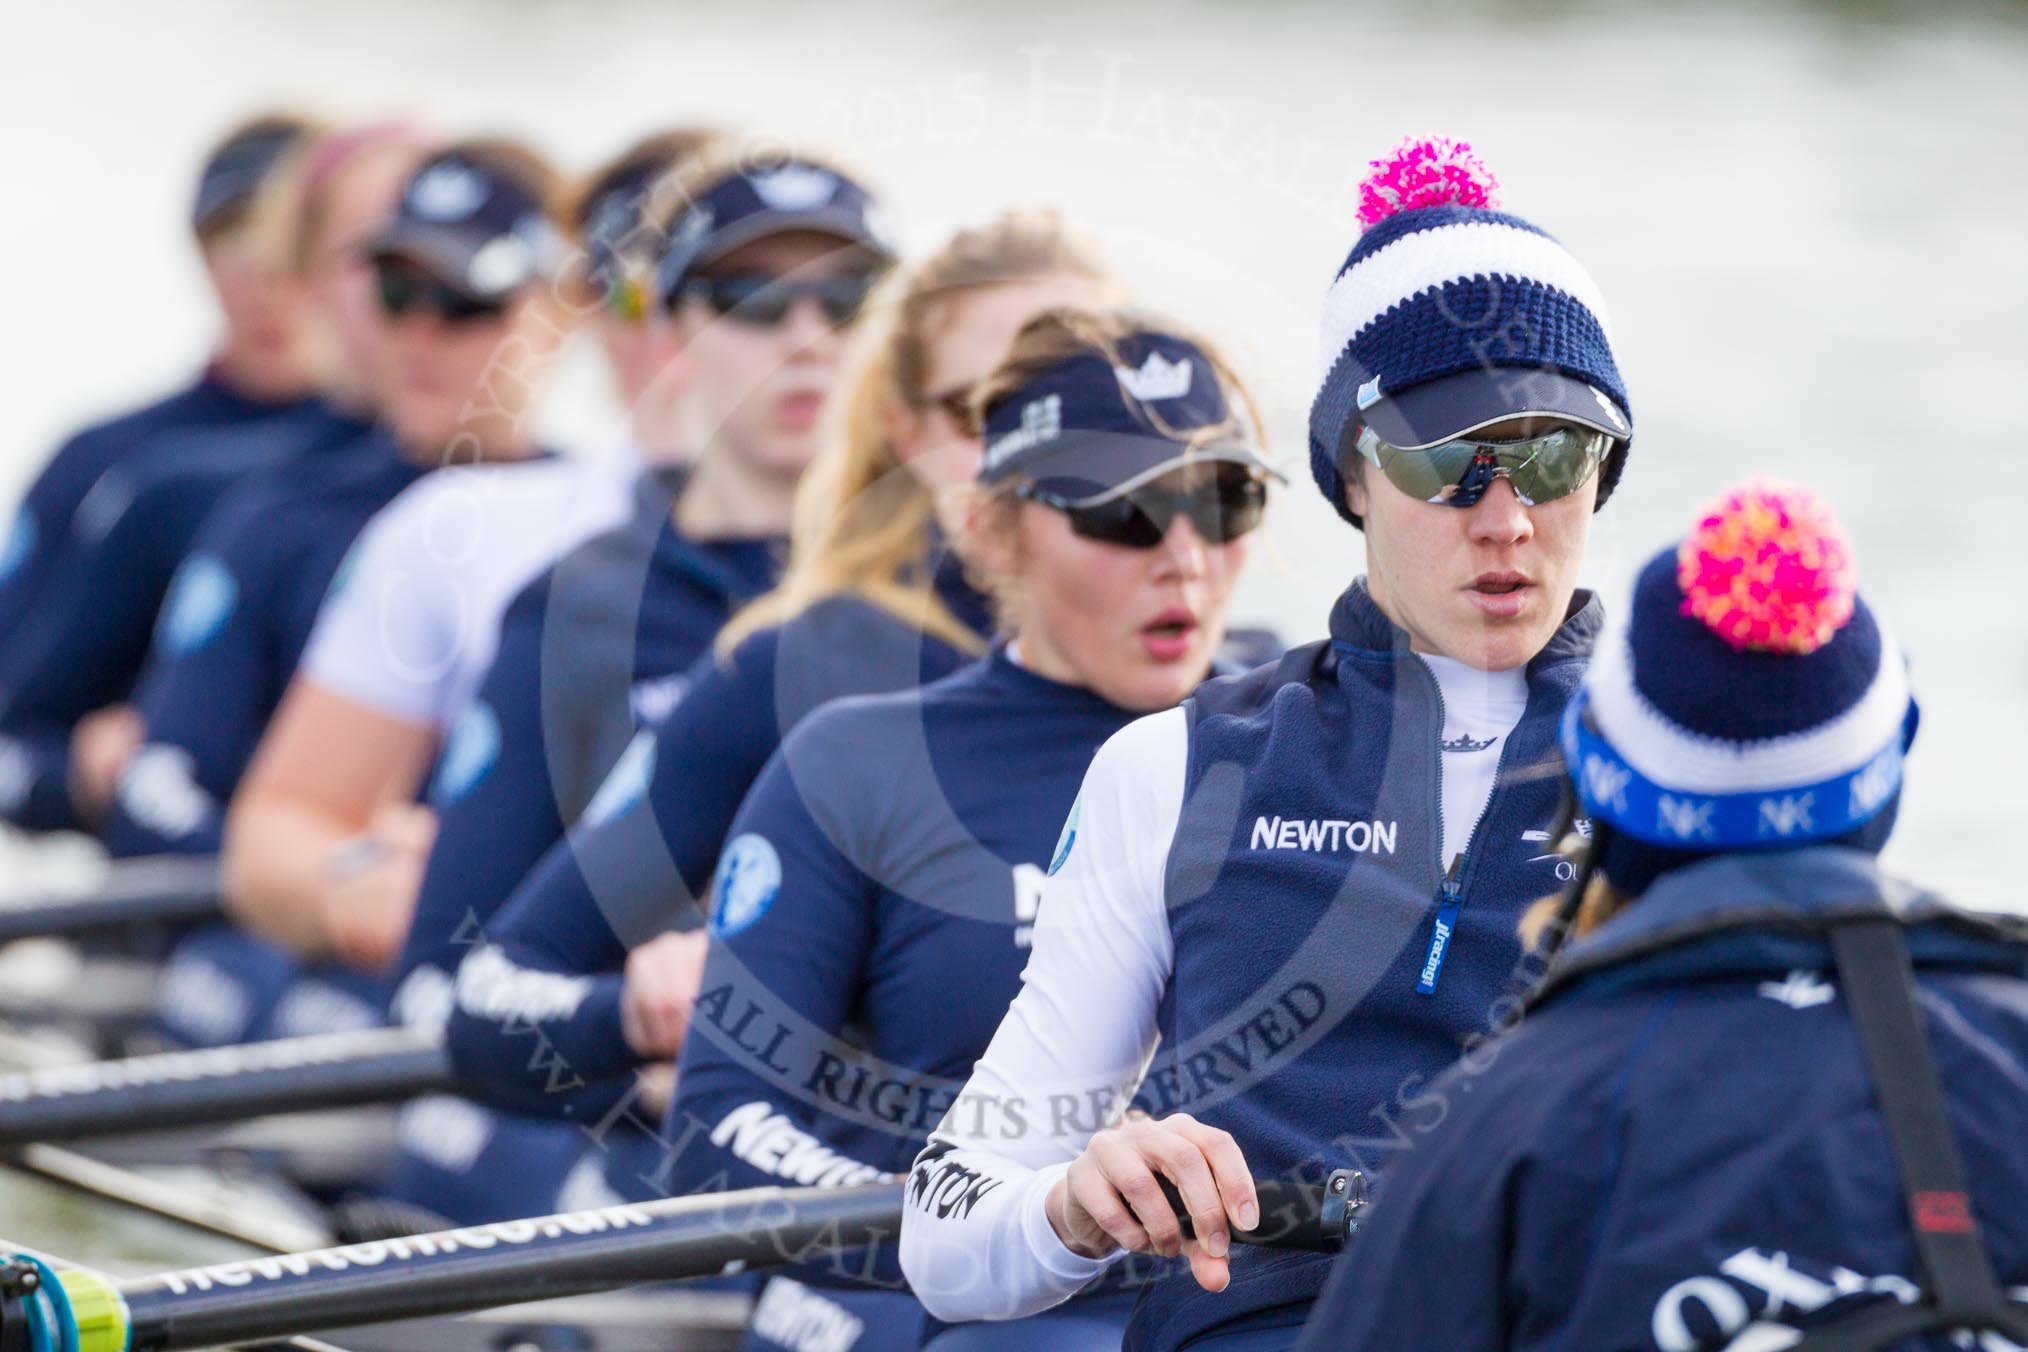 The Boat Race season 2015: OUWBC training Wallingford.

Wallingford,

United Kingdom,
on 04 March 2015 at 15:43, image #49